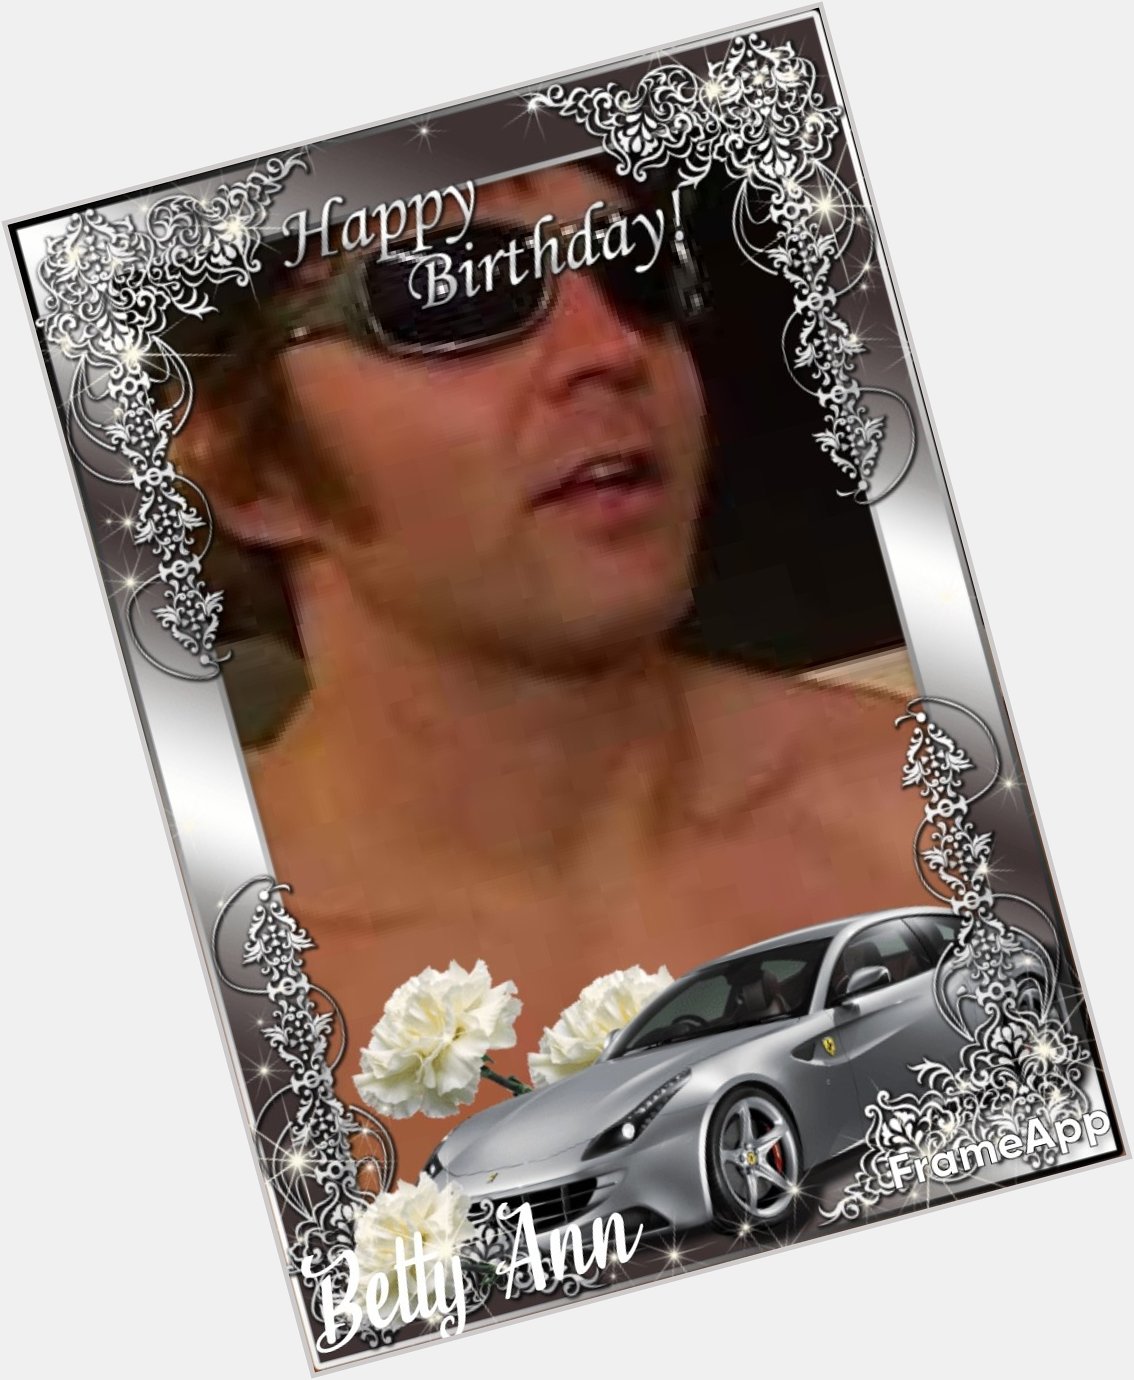 I want to wish Jon Moxley aka dean Ambrose a very happy birthday sorry late posting 